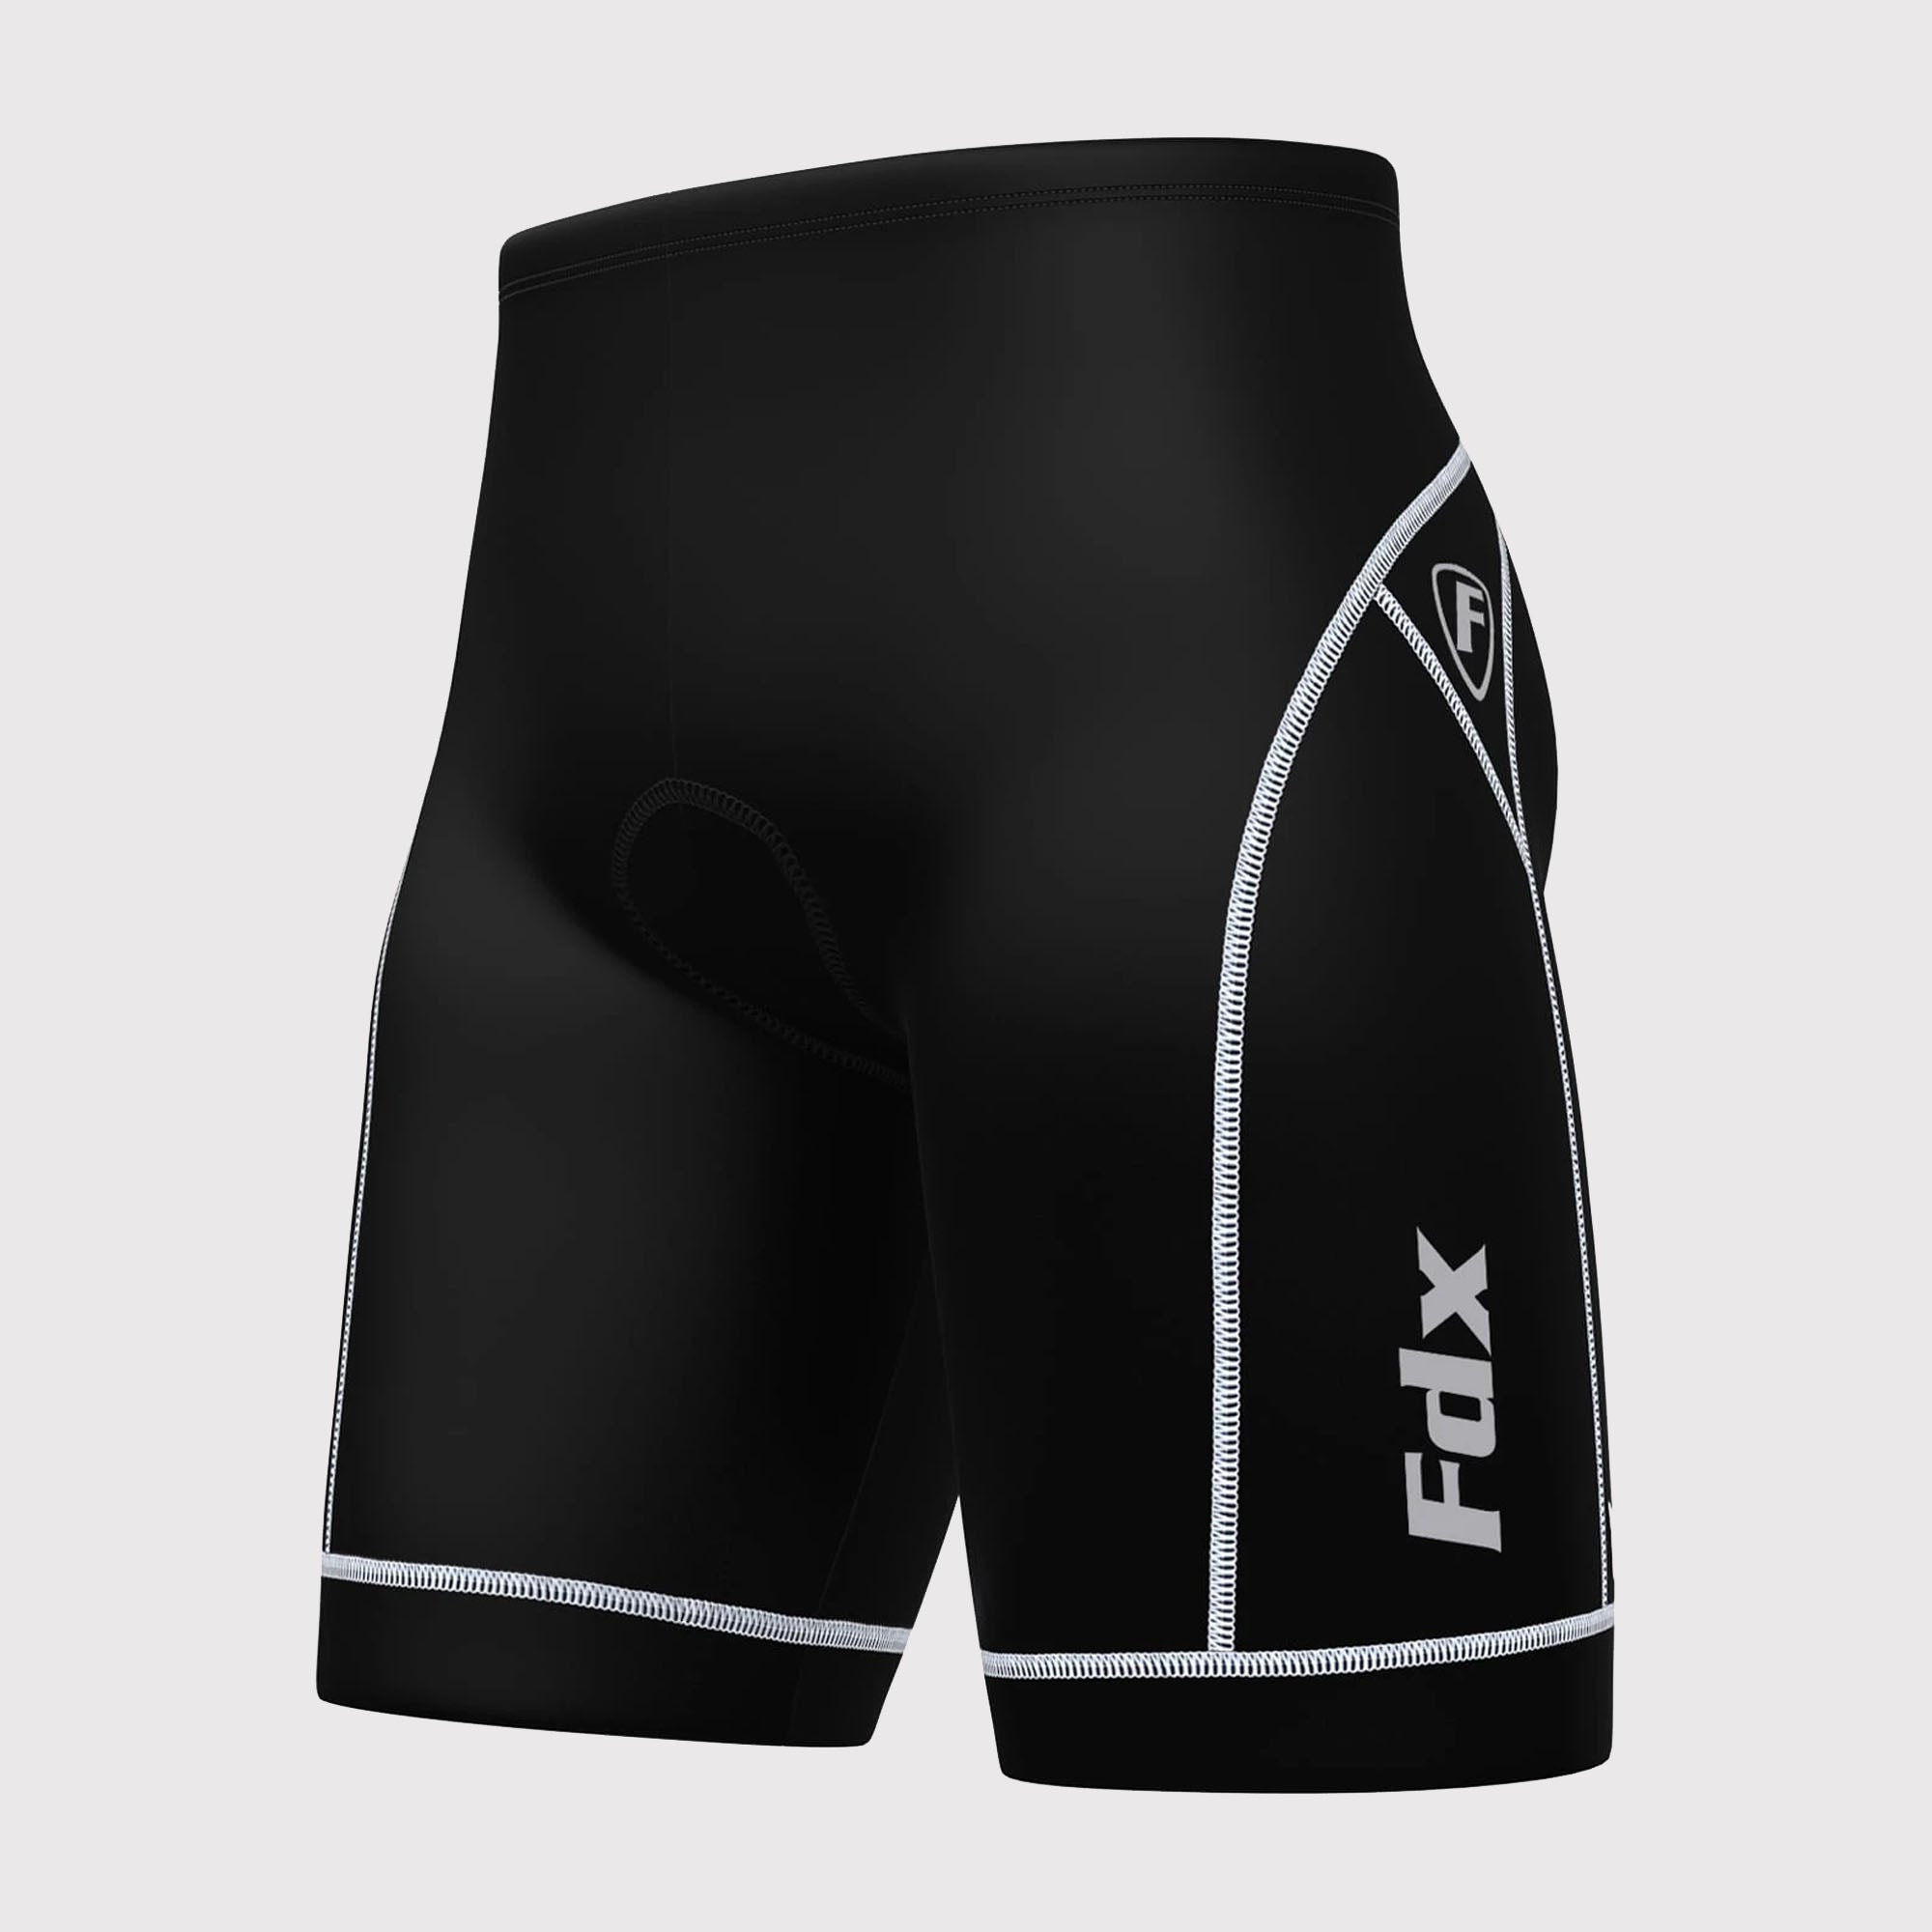 Fdx Mens Black & White Gel Padded Cycling Shorts for Summer Best Outdoor Knickers Road Bike Short Length Pants - Ridest